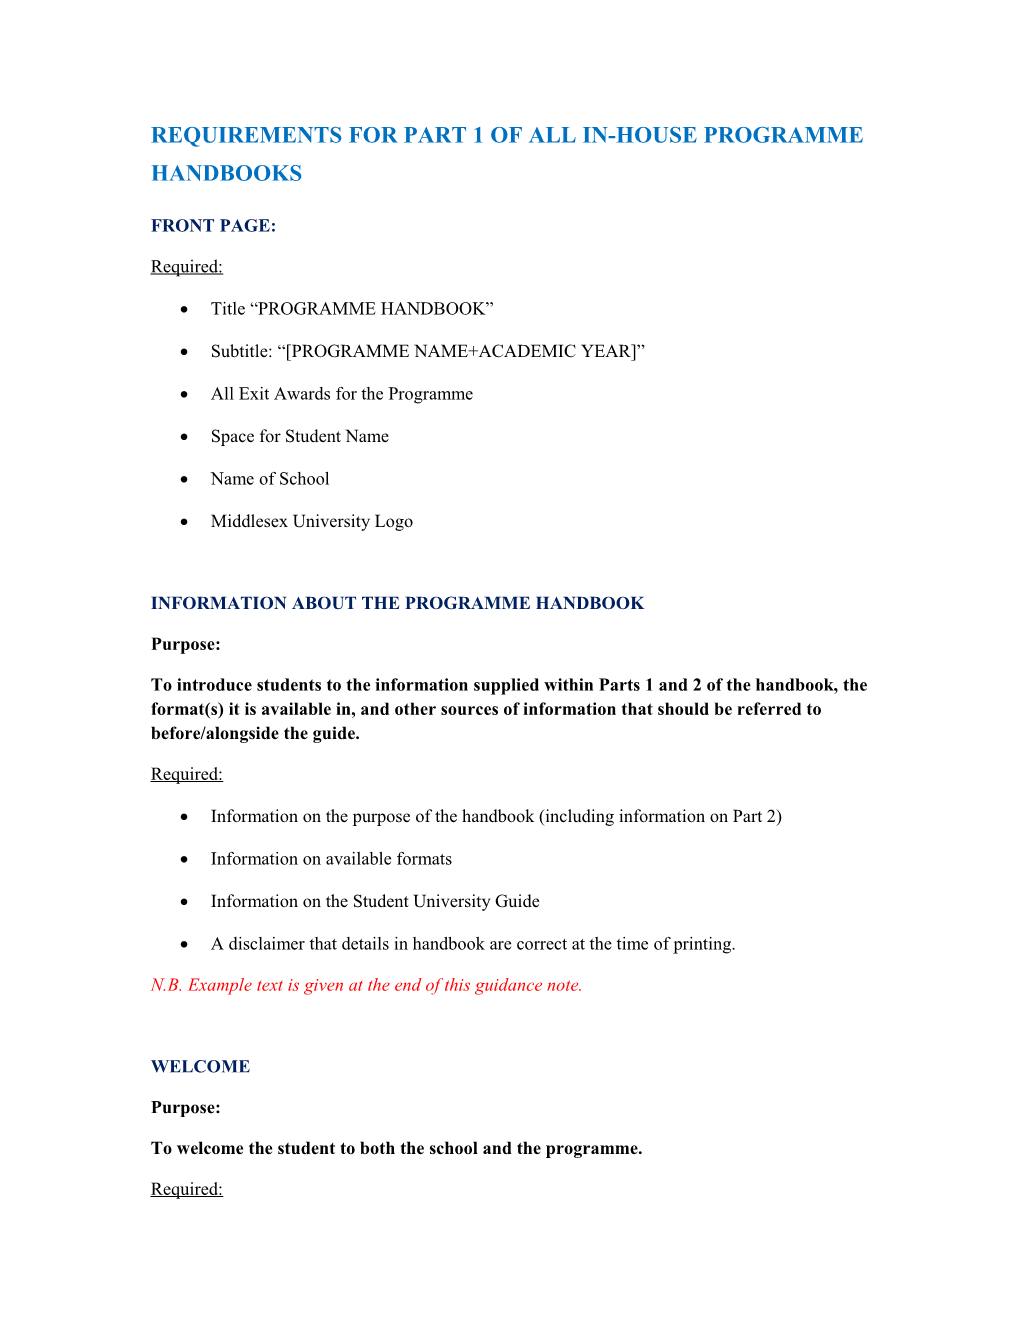 Requirements for Part 1 of All In-House Programme Handbooks Front Page